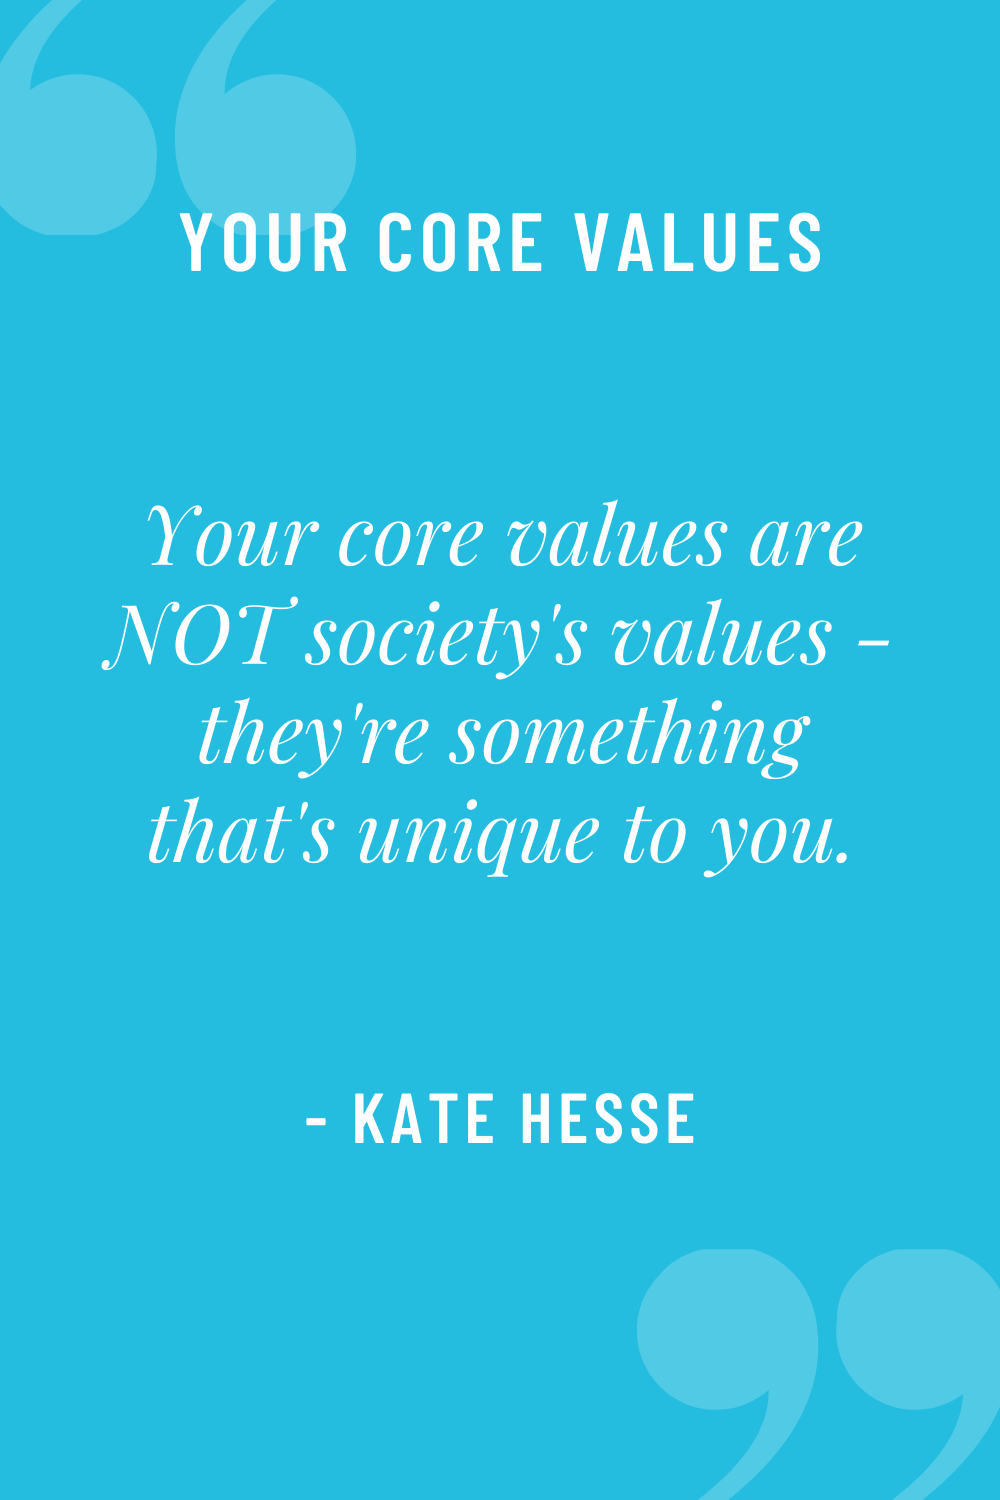 Your core values are NOT society's values - they're something that's unique to you!